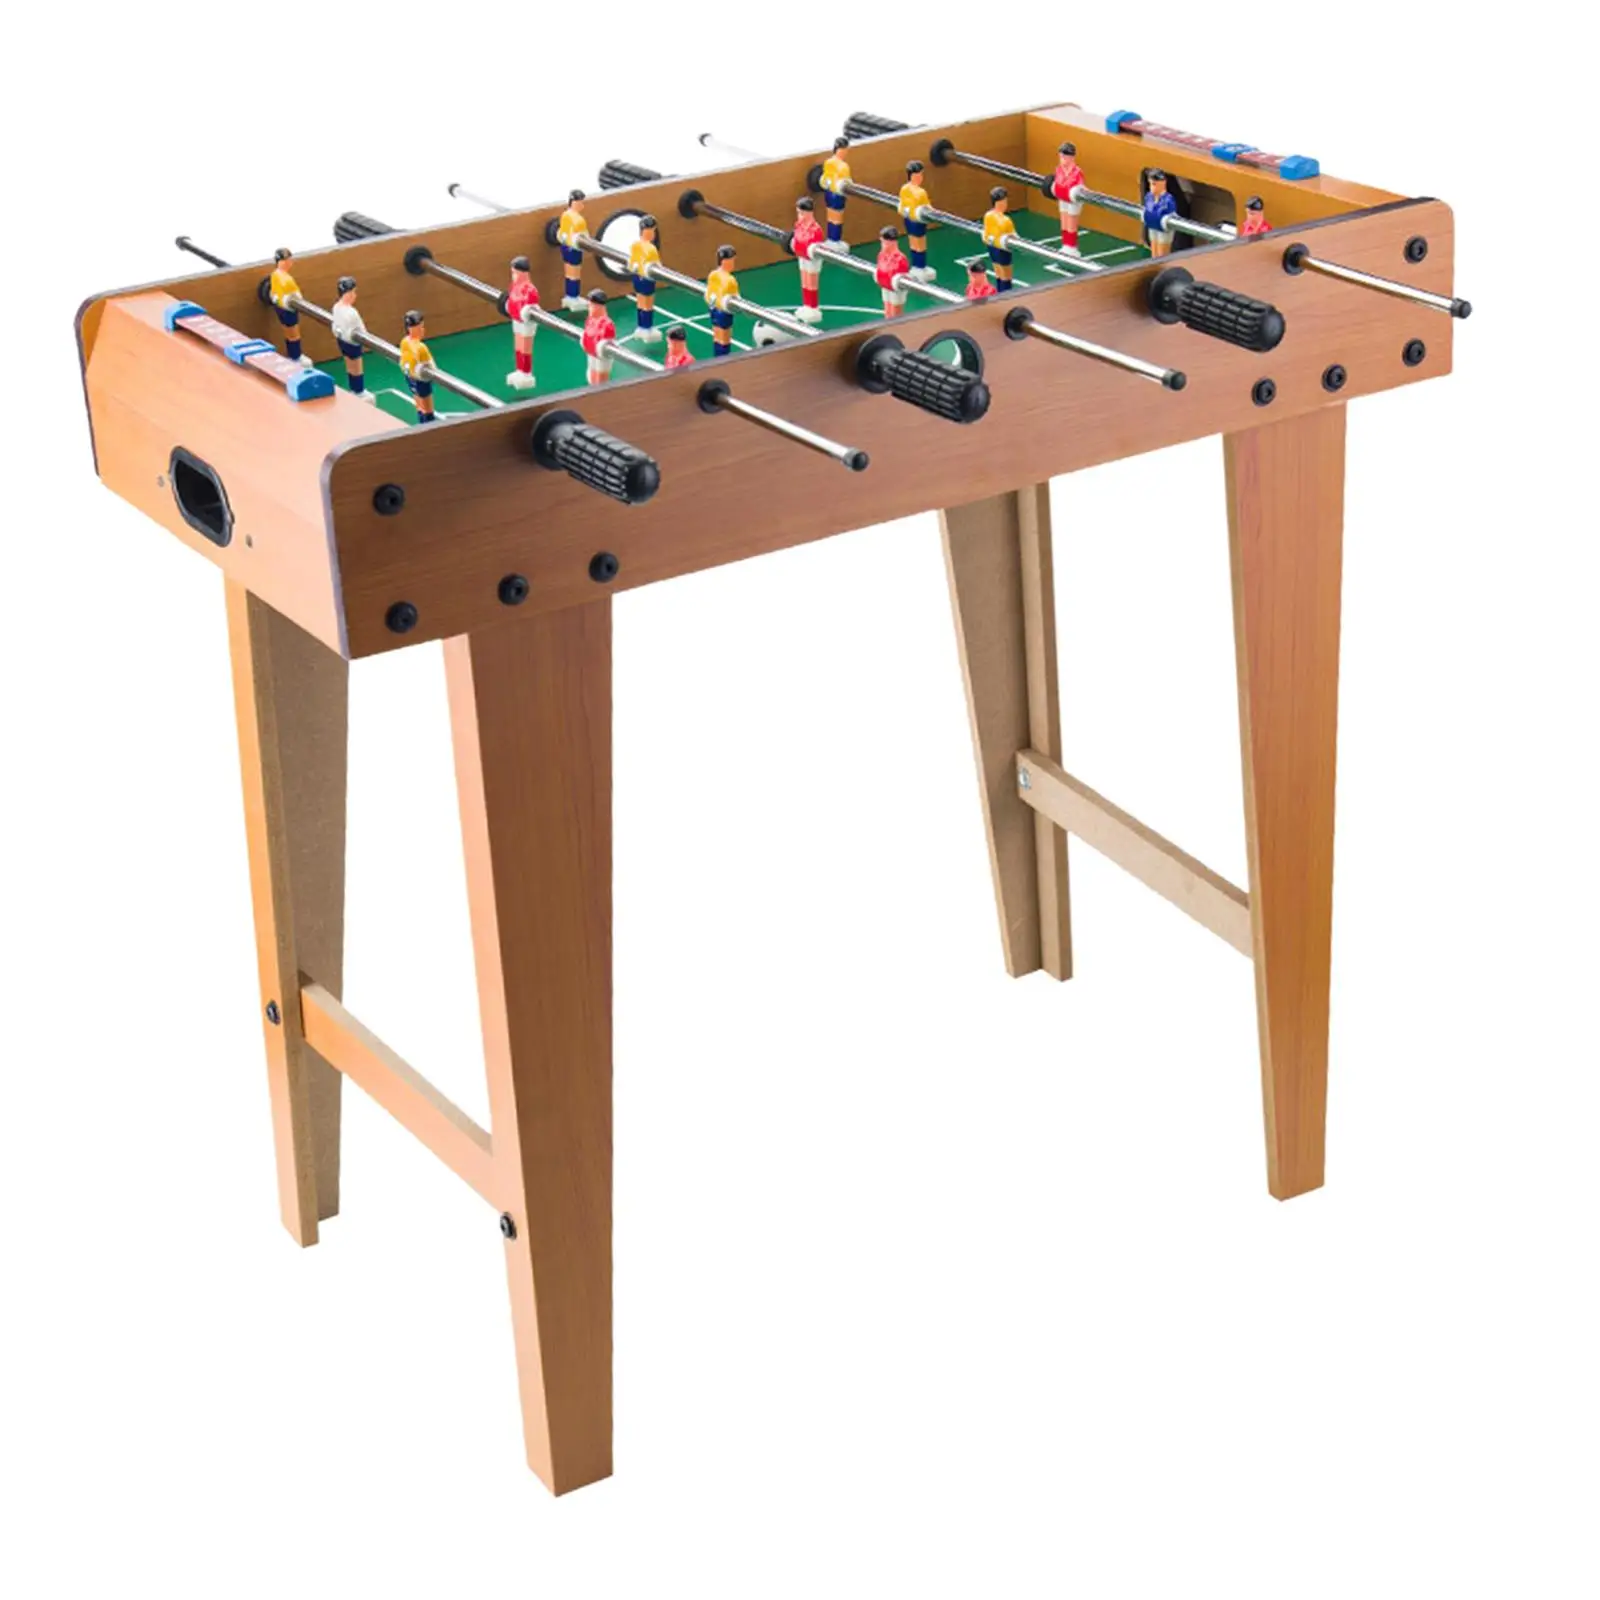 Wood Foosball Table Tabletop Football Game Interactive Toy with Ball Funny Football Game Desktop Game for Family